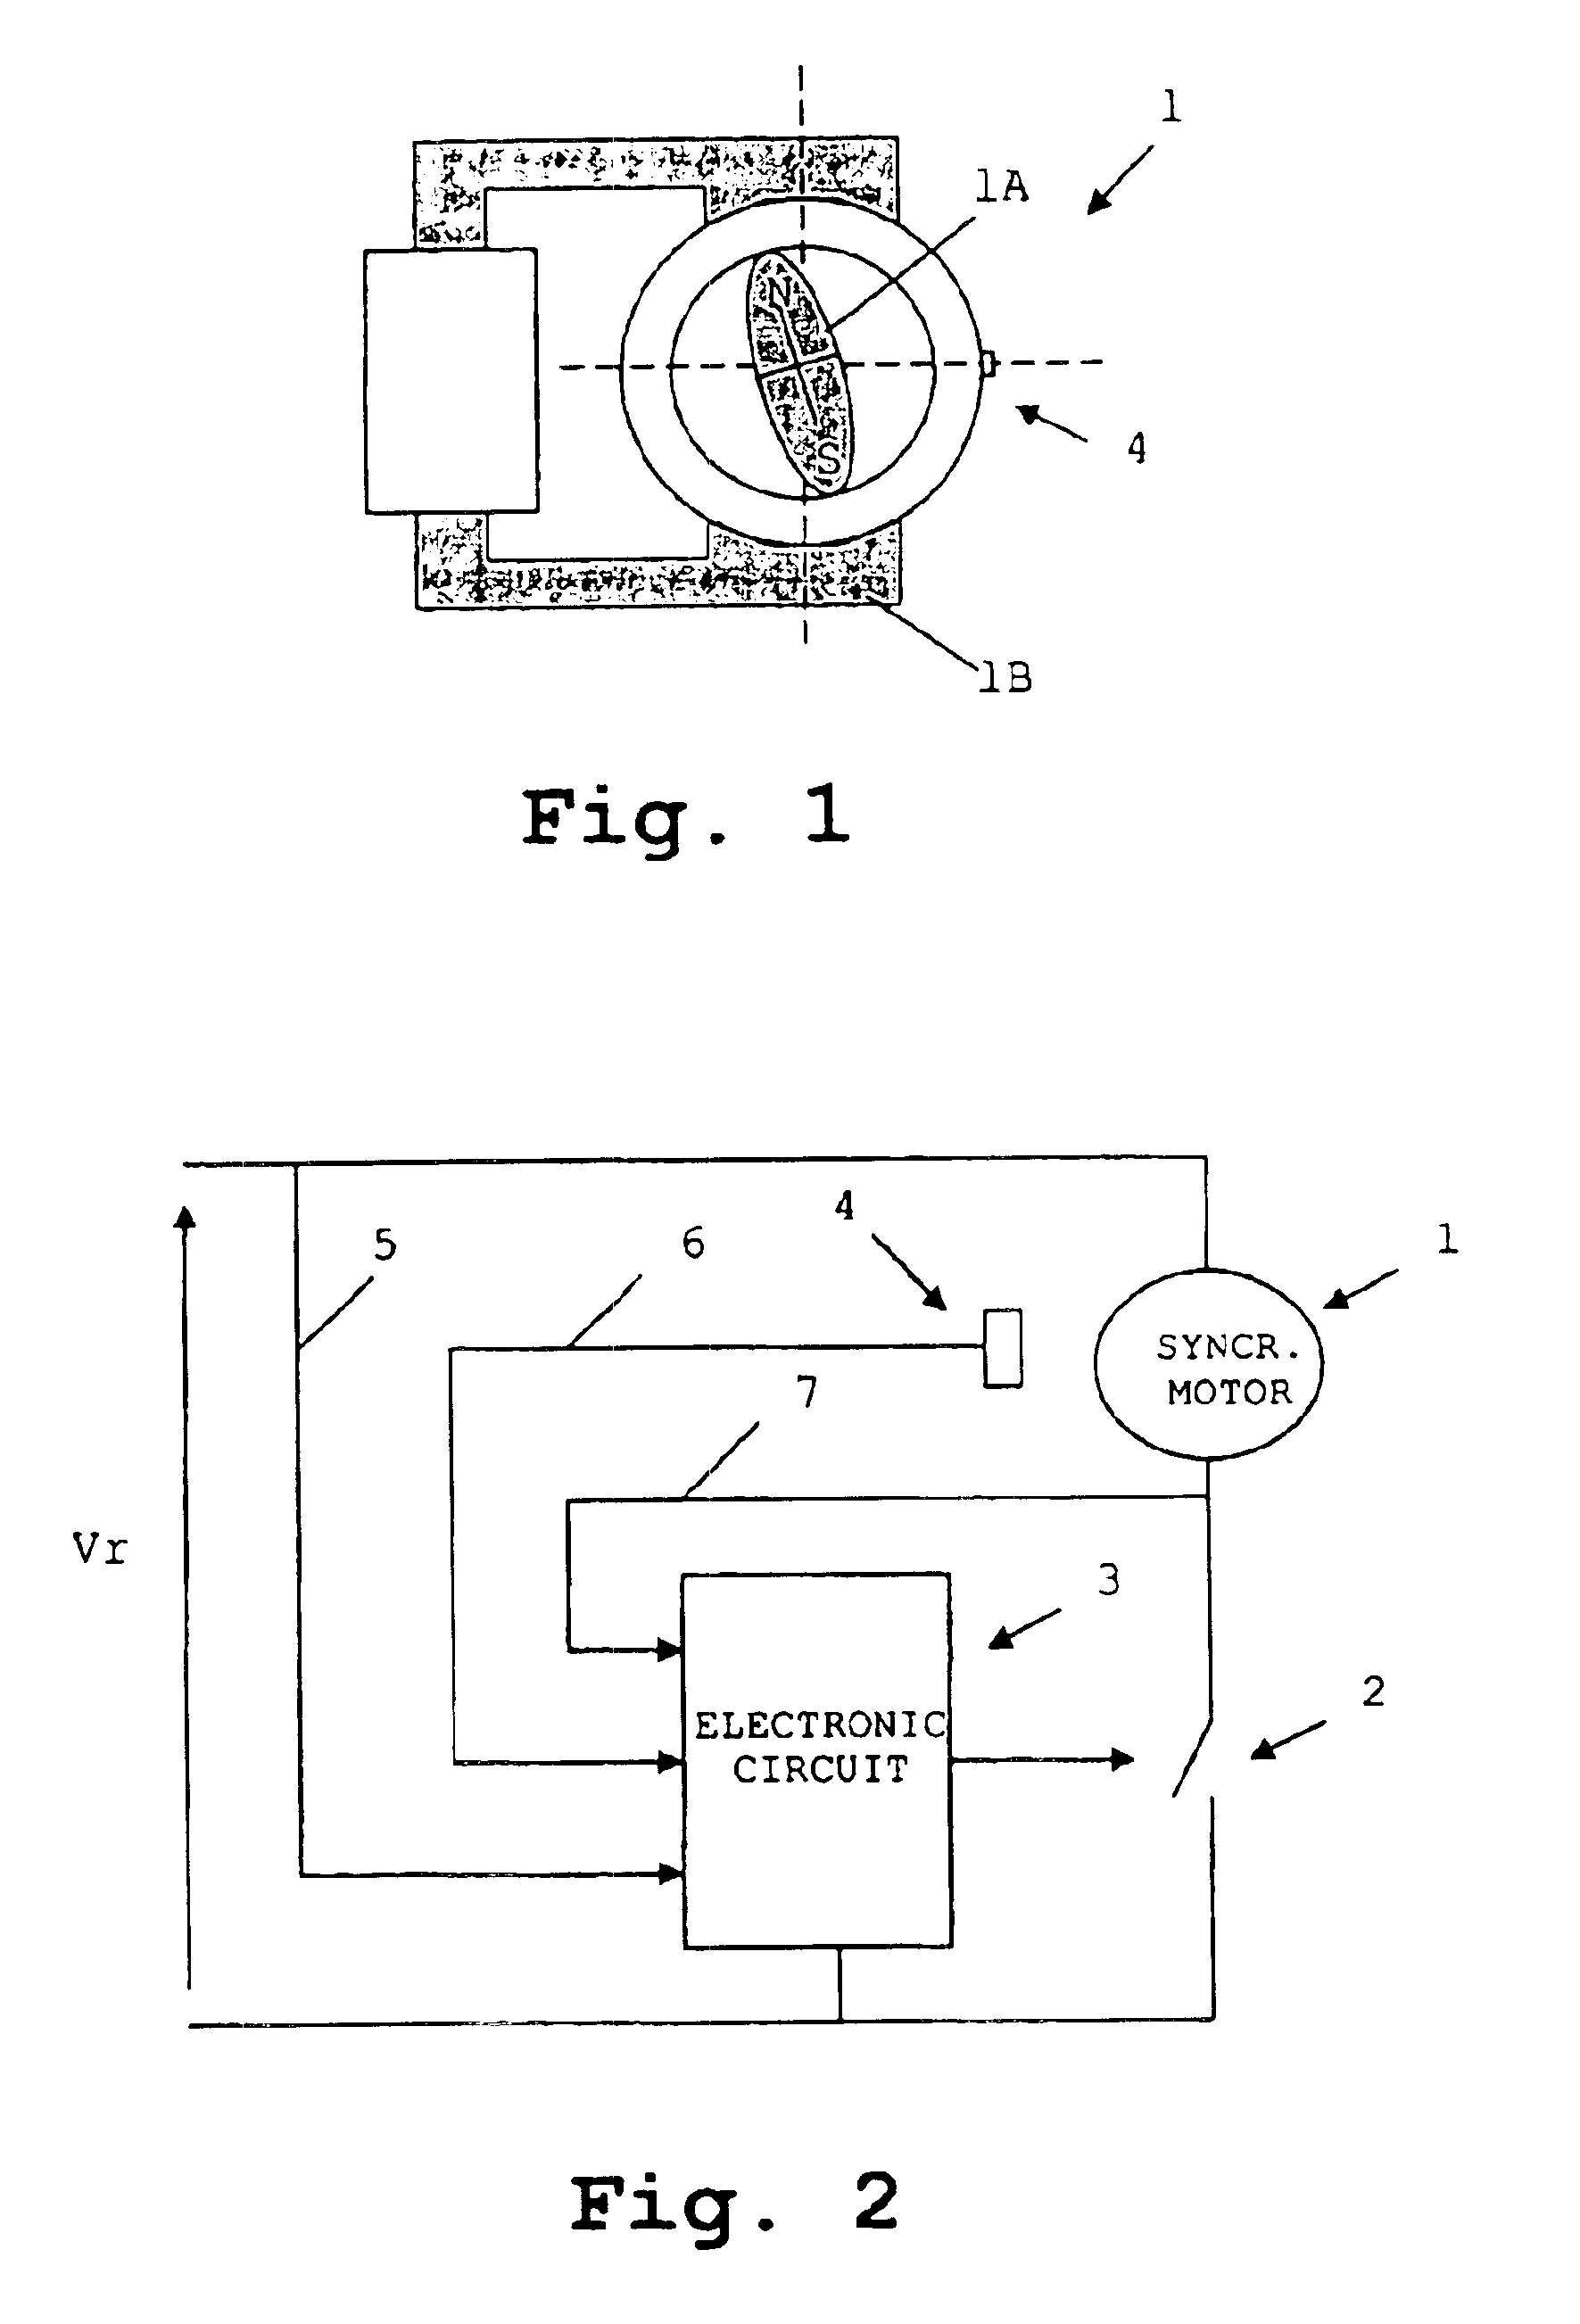 Electronic device for controlling a synchronous motor with permanent-magnet rotor